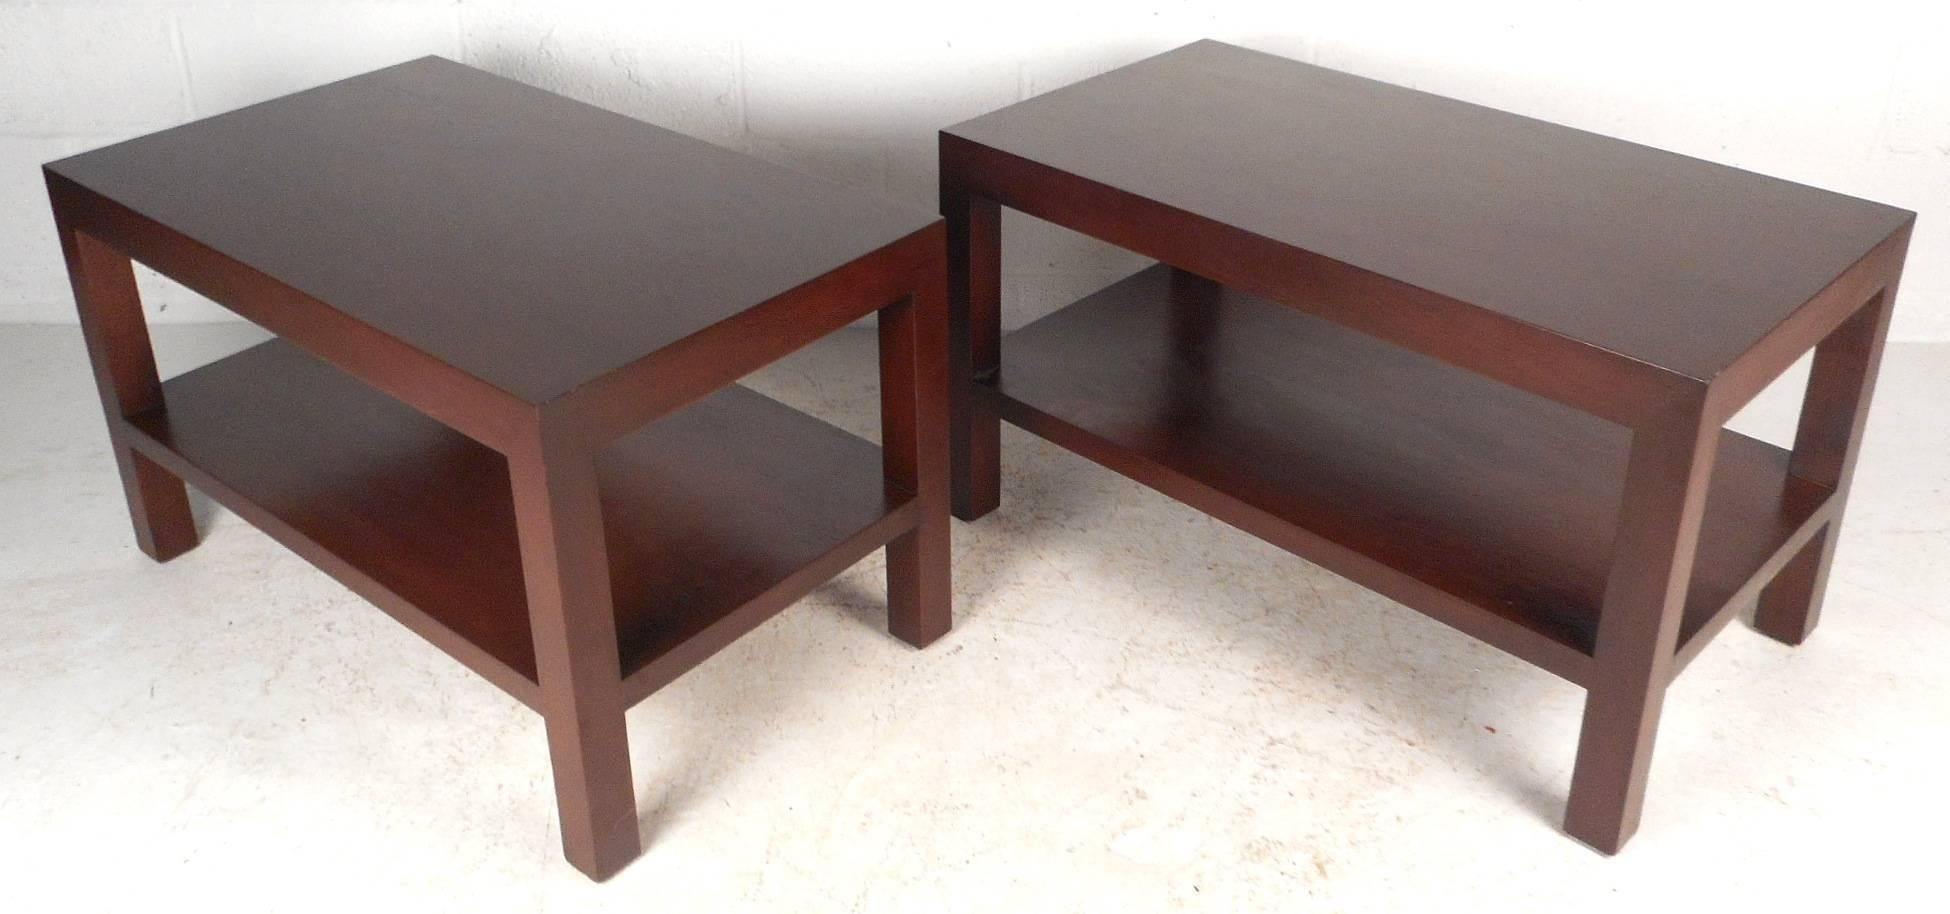 Beautiful pair of vintage modern side tables feature a straight line two tier design. The rectangular shape and solid dark walnut wood add to the mid-century appeal. This unique pair make the perfect addition to any home, business, or office